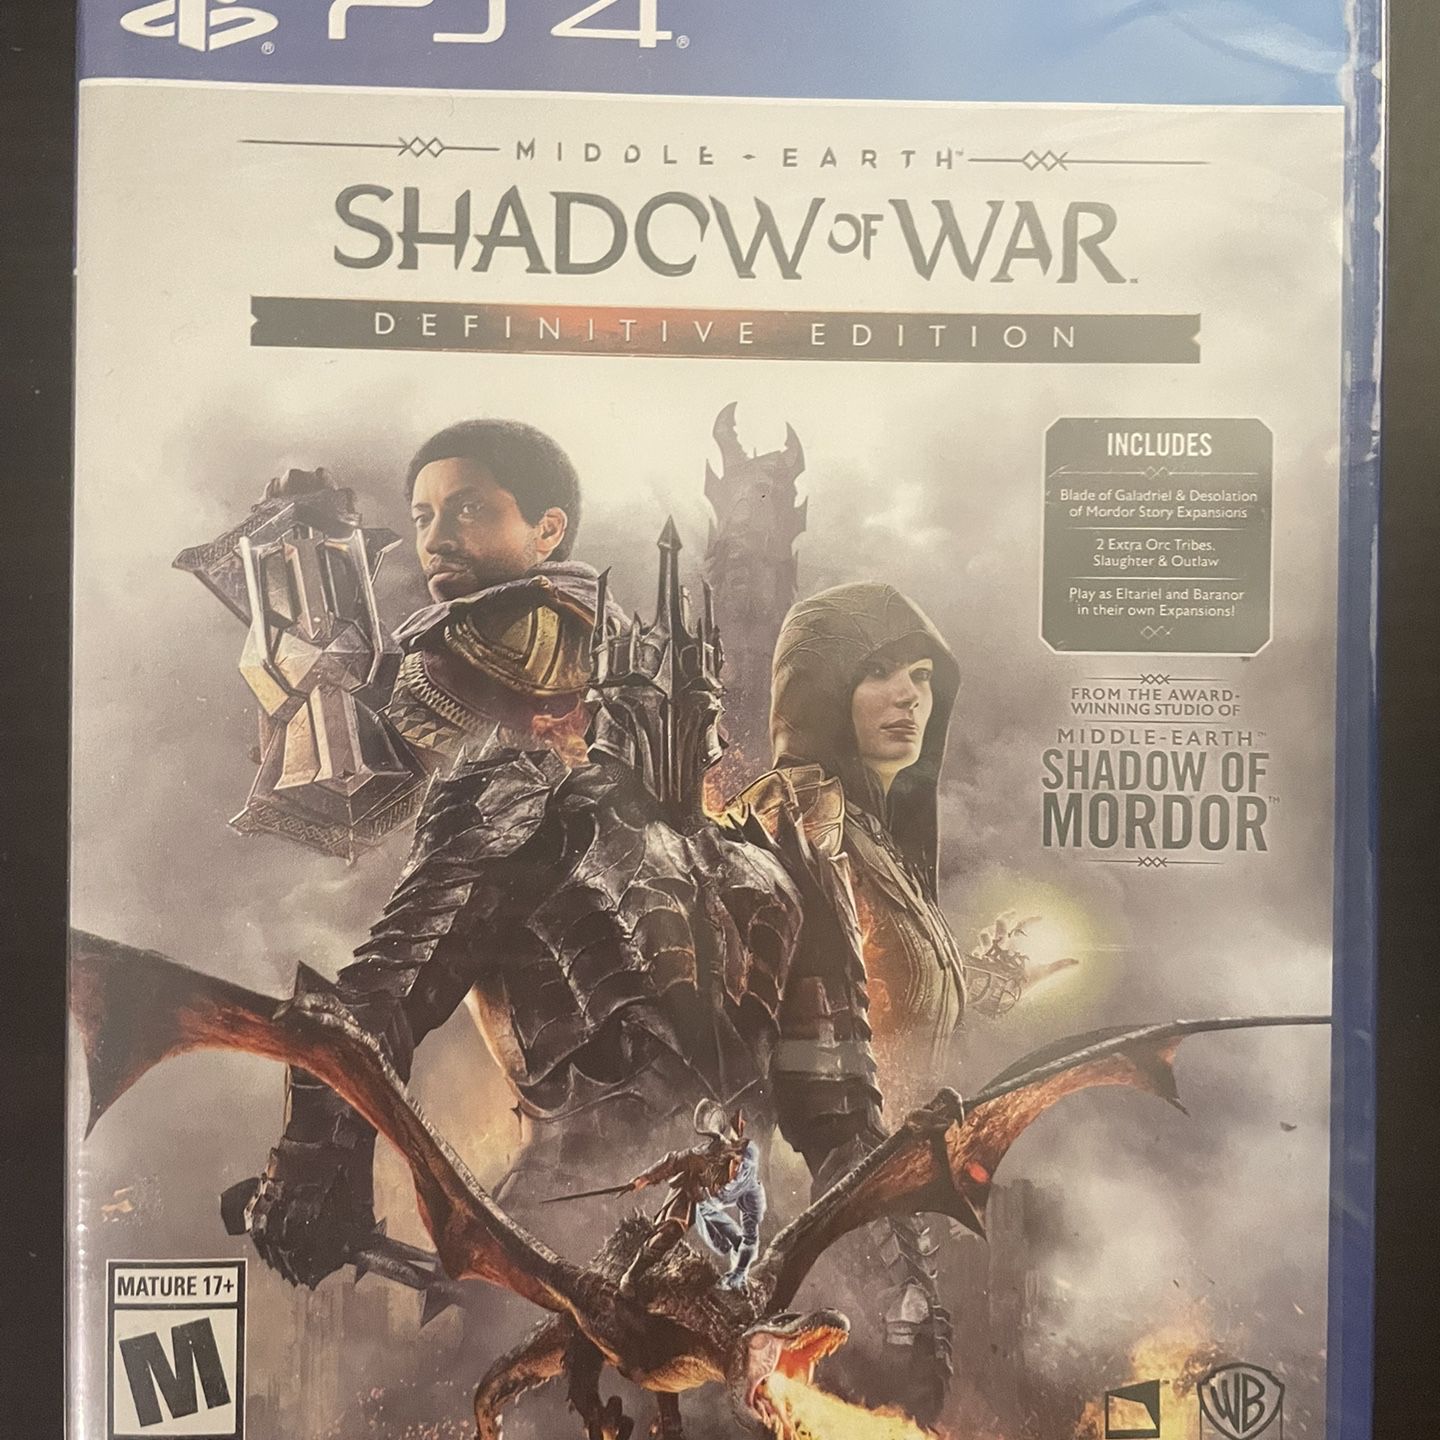 Middle-earth: Shadow of War Definitive Edition - What's included